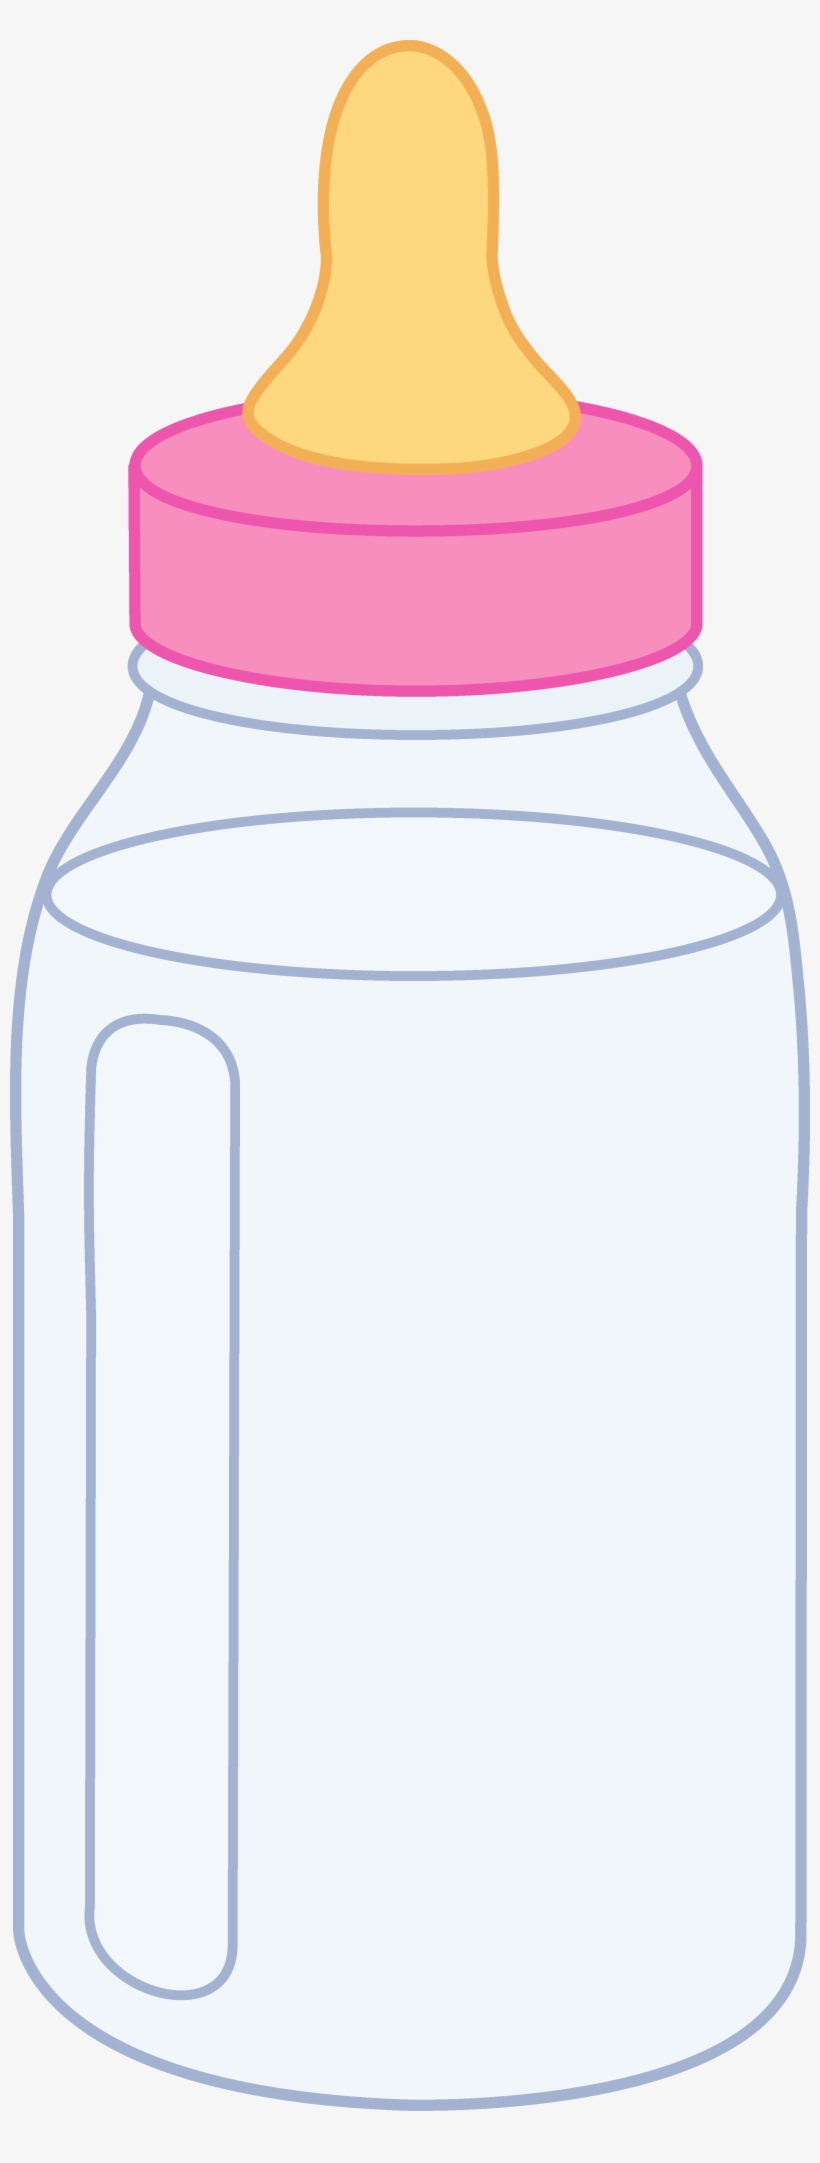 Baby bottle drawing.